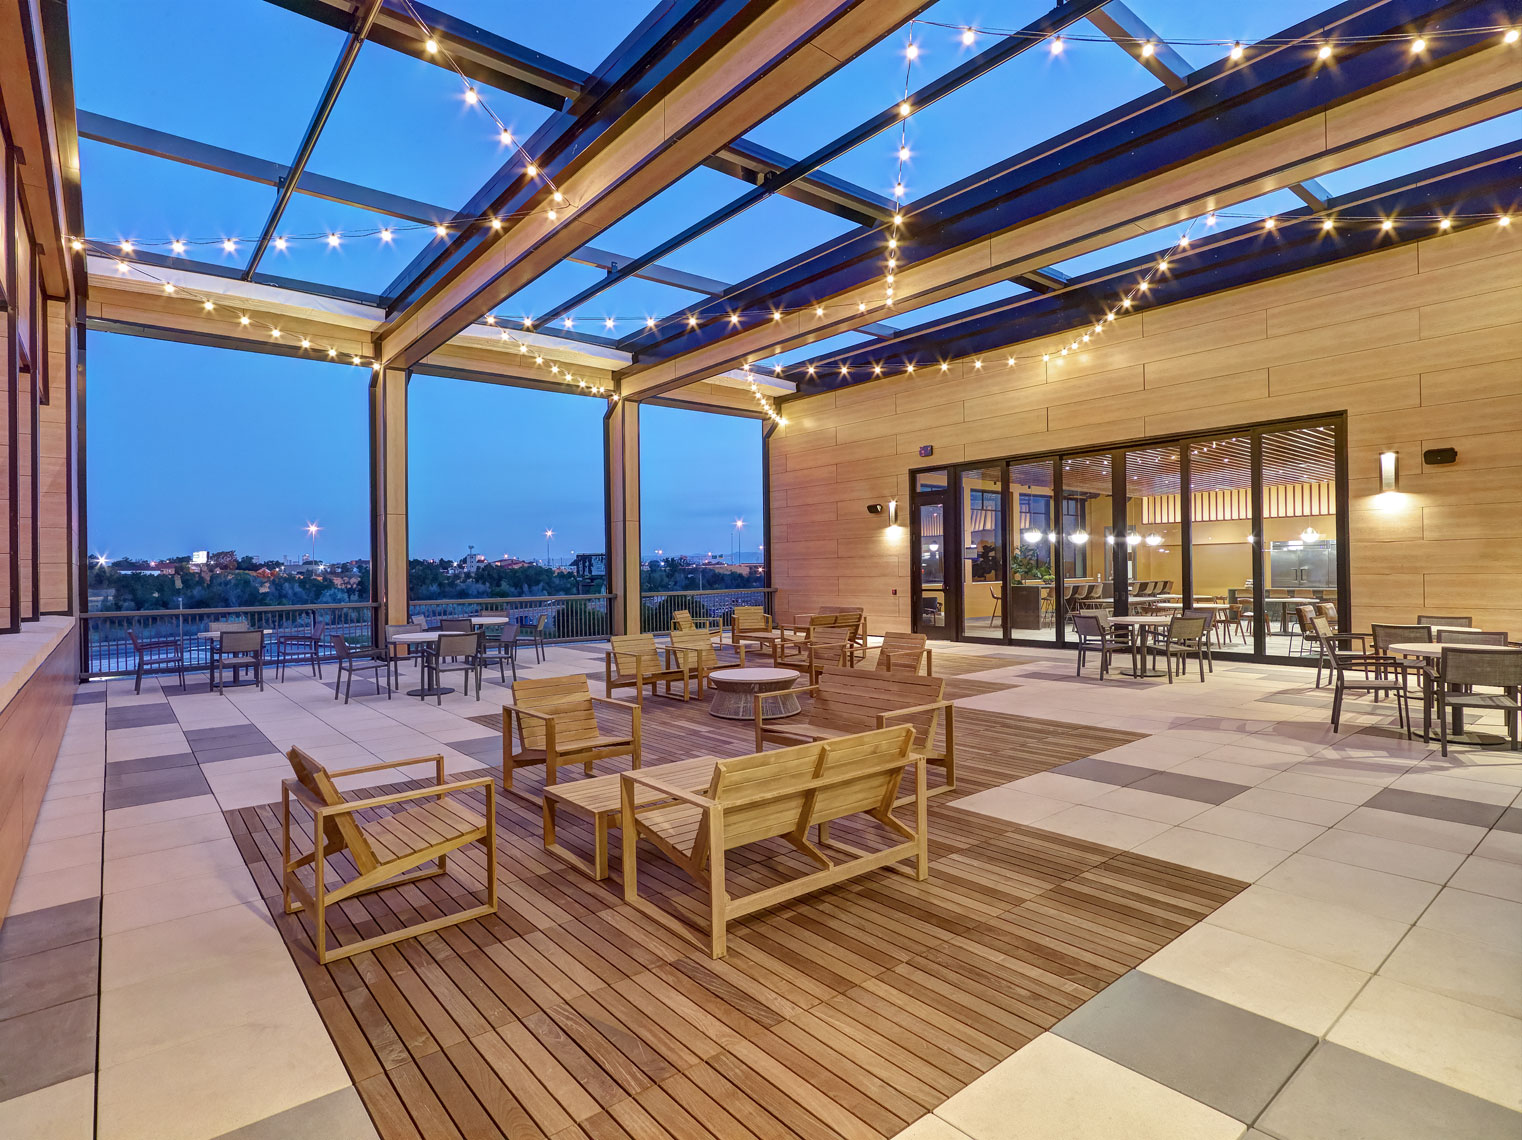 Patio/seating/skylights/Denver/Ryan/architectural photography